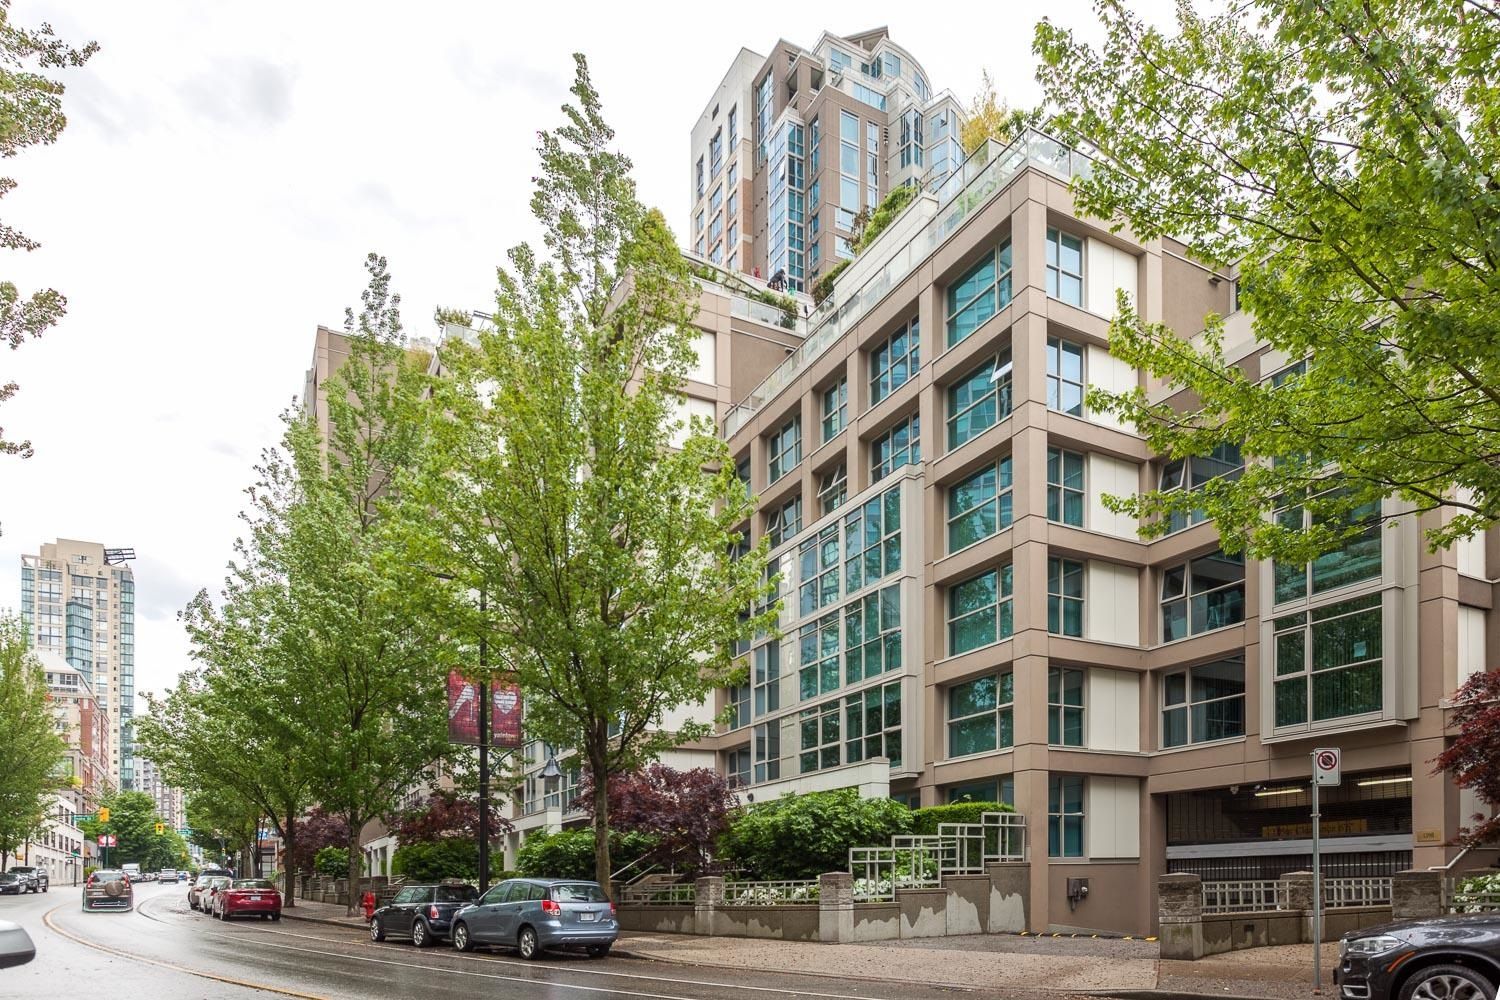 New property listed in Yaletown, Vancouver West